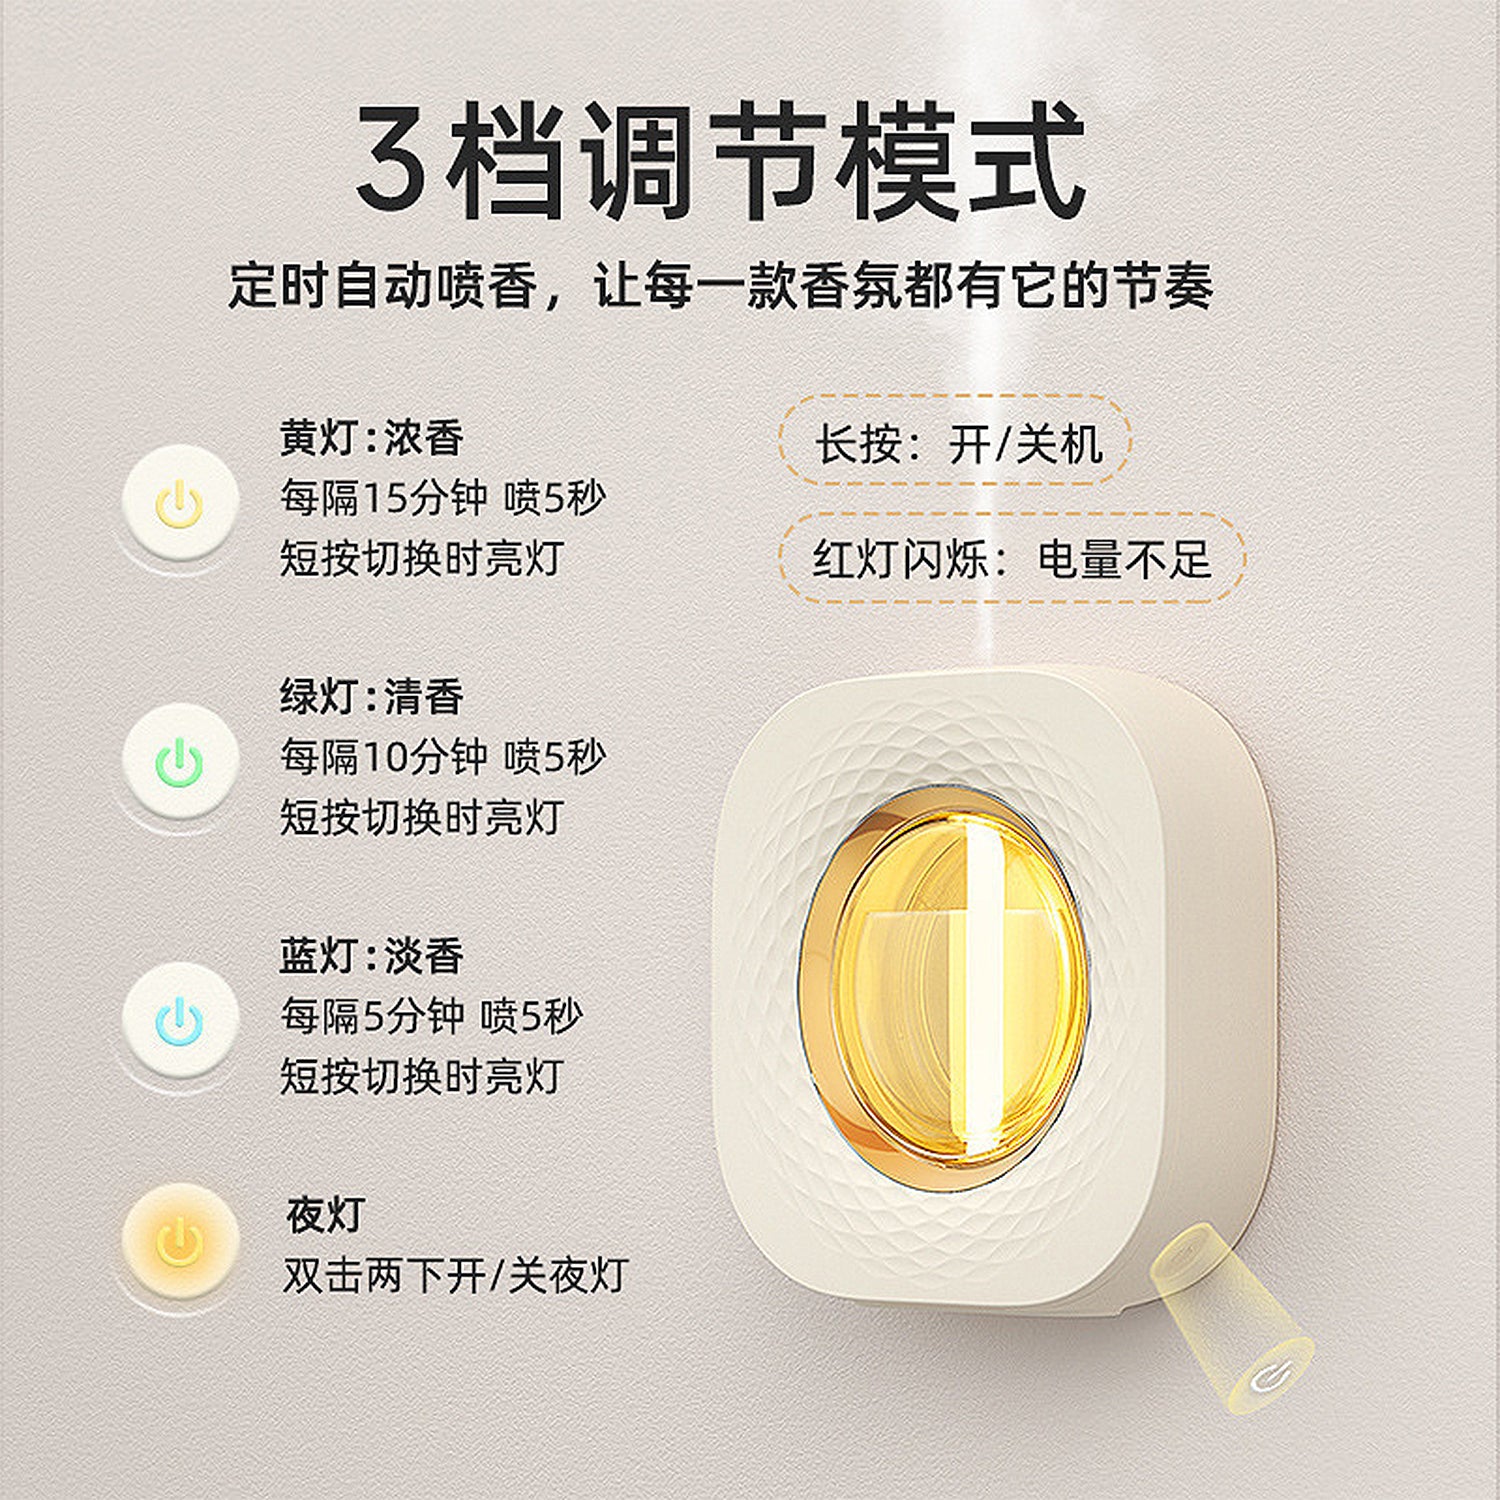 Aroma Diffuser Automatic Fragrance Sprayer For Home Use, Desktop/Wall-Mounted Scent Diffuser For Hotel/Commercial Use, Small-Sized Indoor Essential Oil Scent Machine (Without Essential Oil)